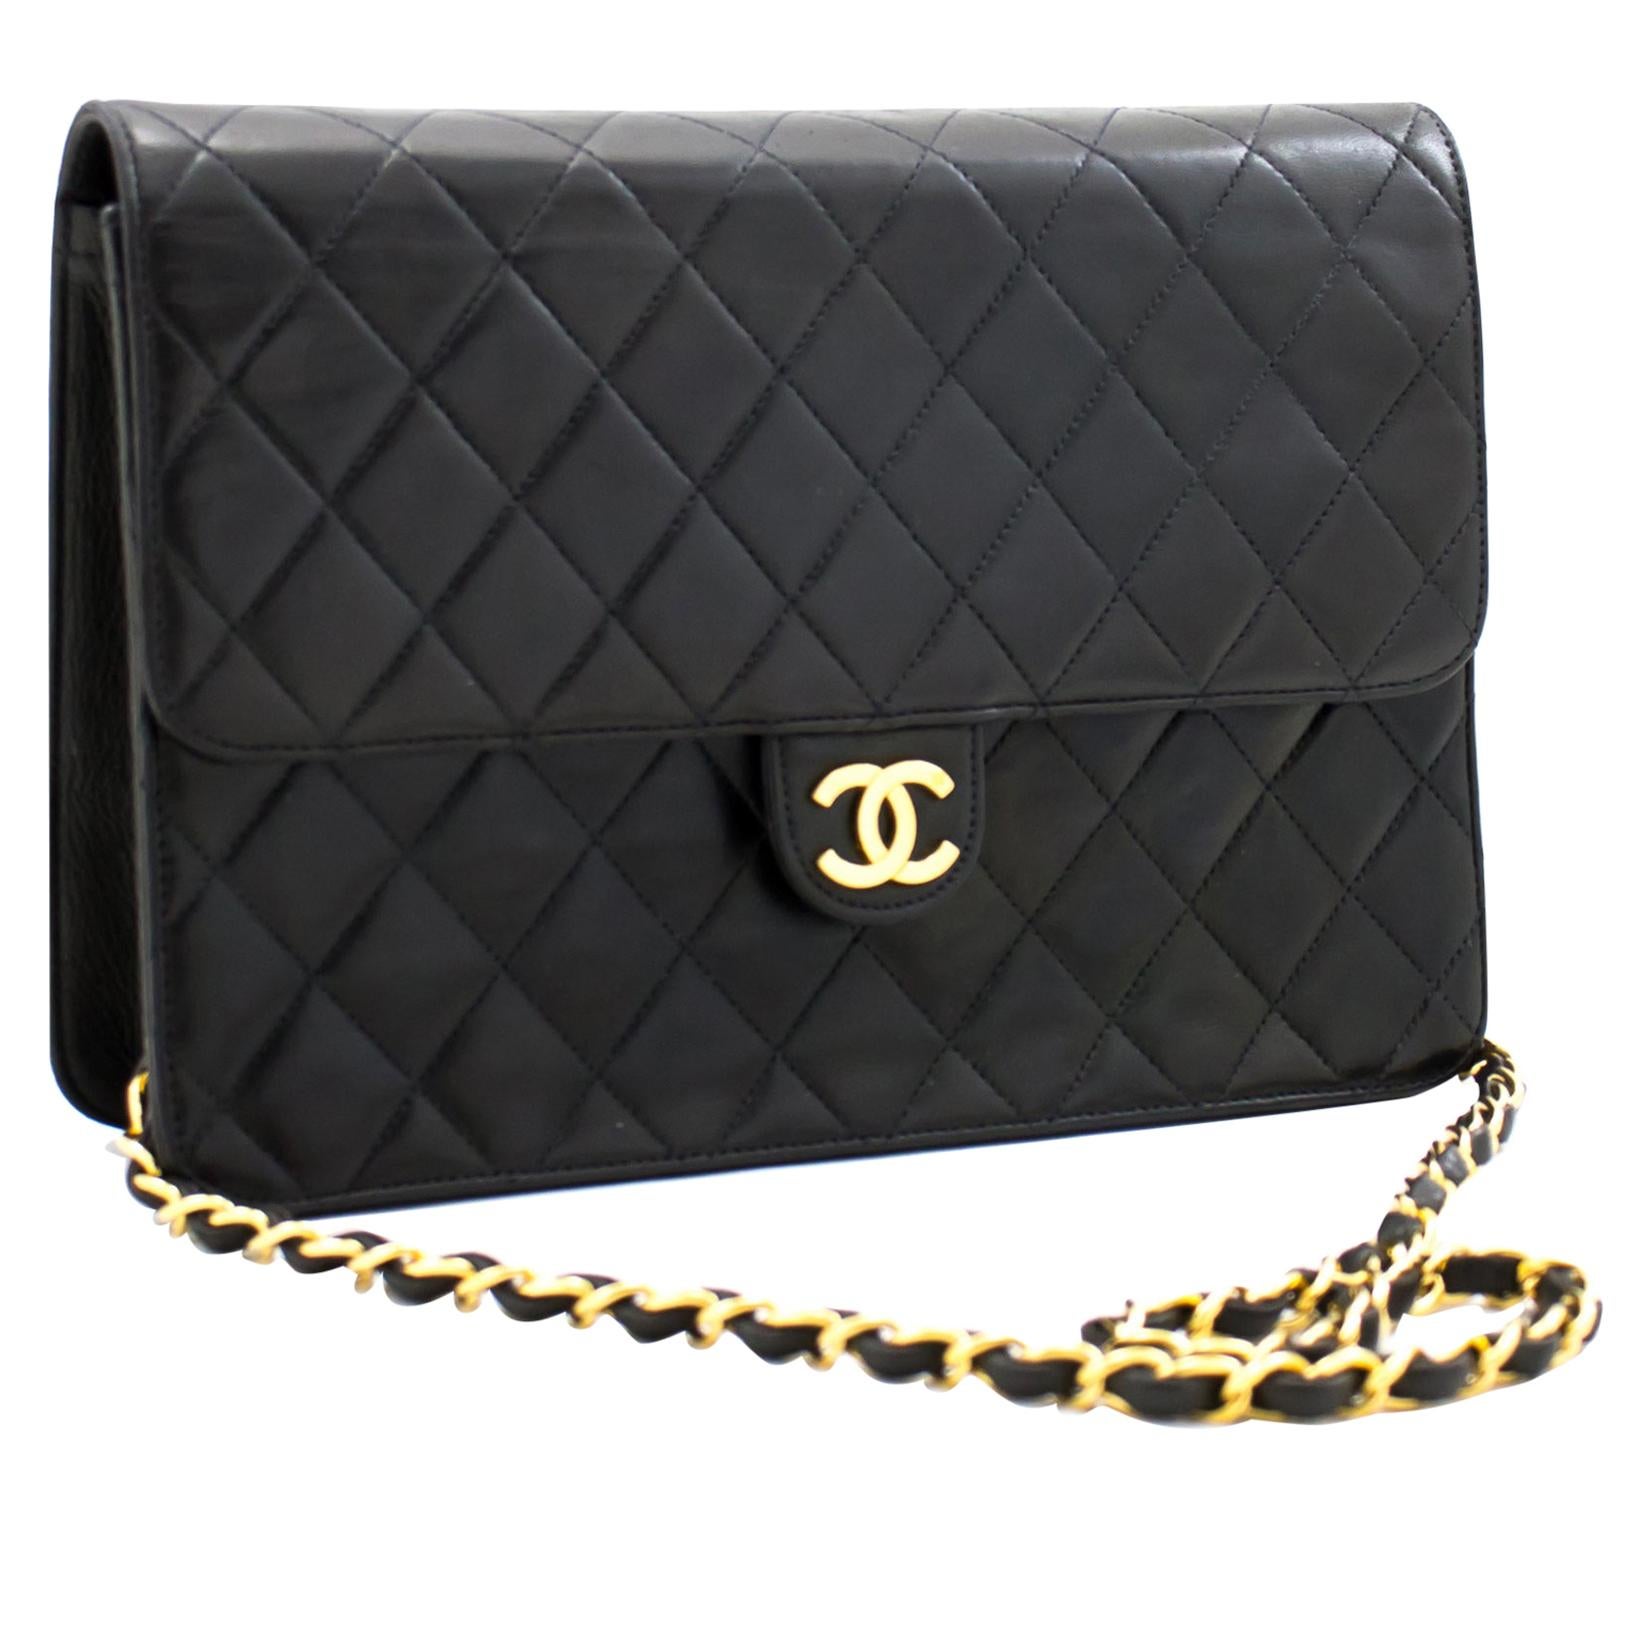 CHANEL Chain Shoulder Bag Black Clutch Flap Quilted Lambskin